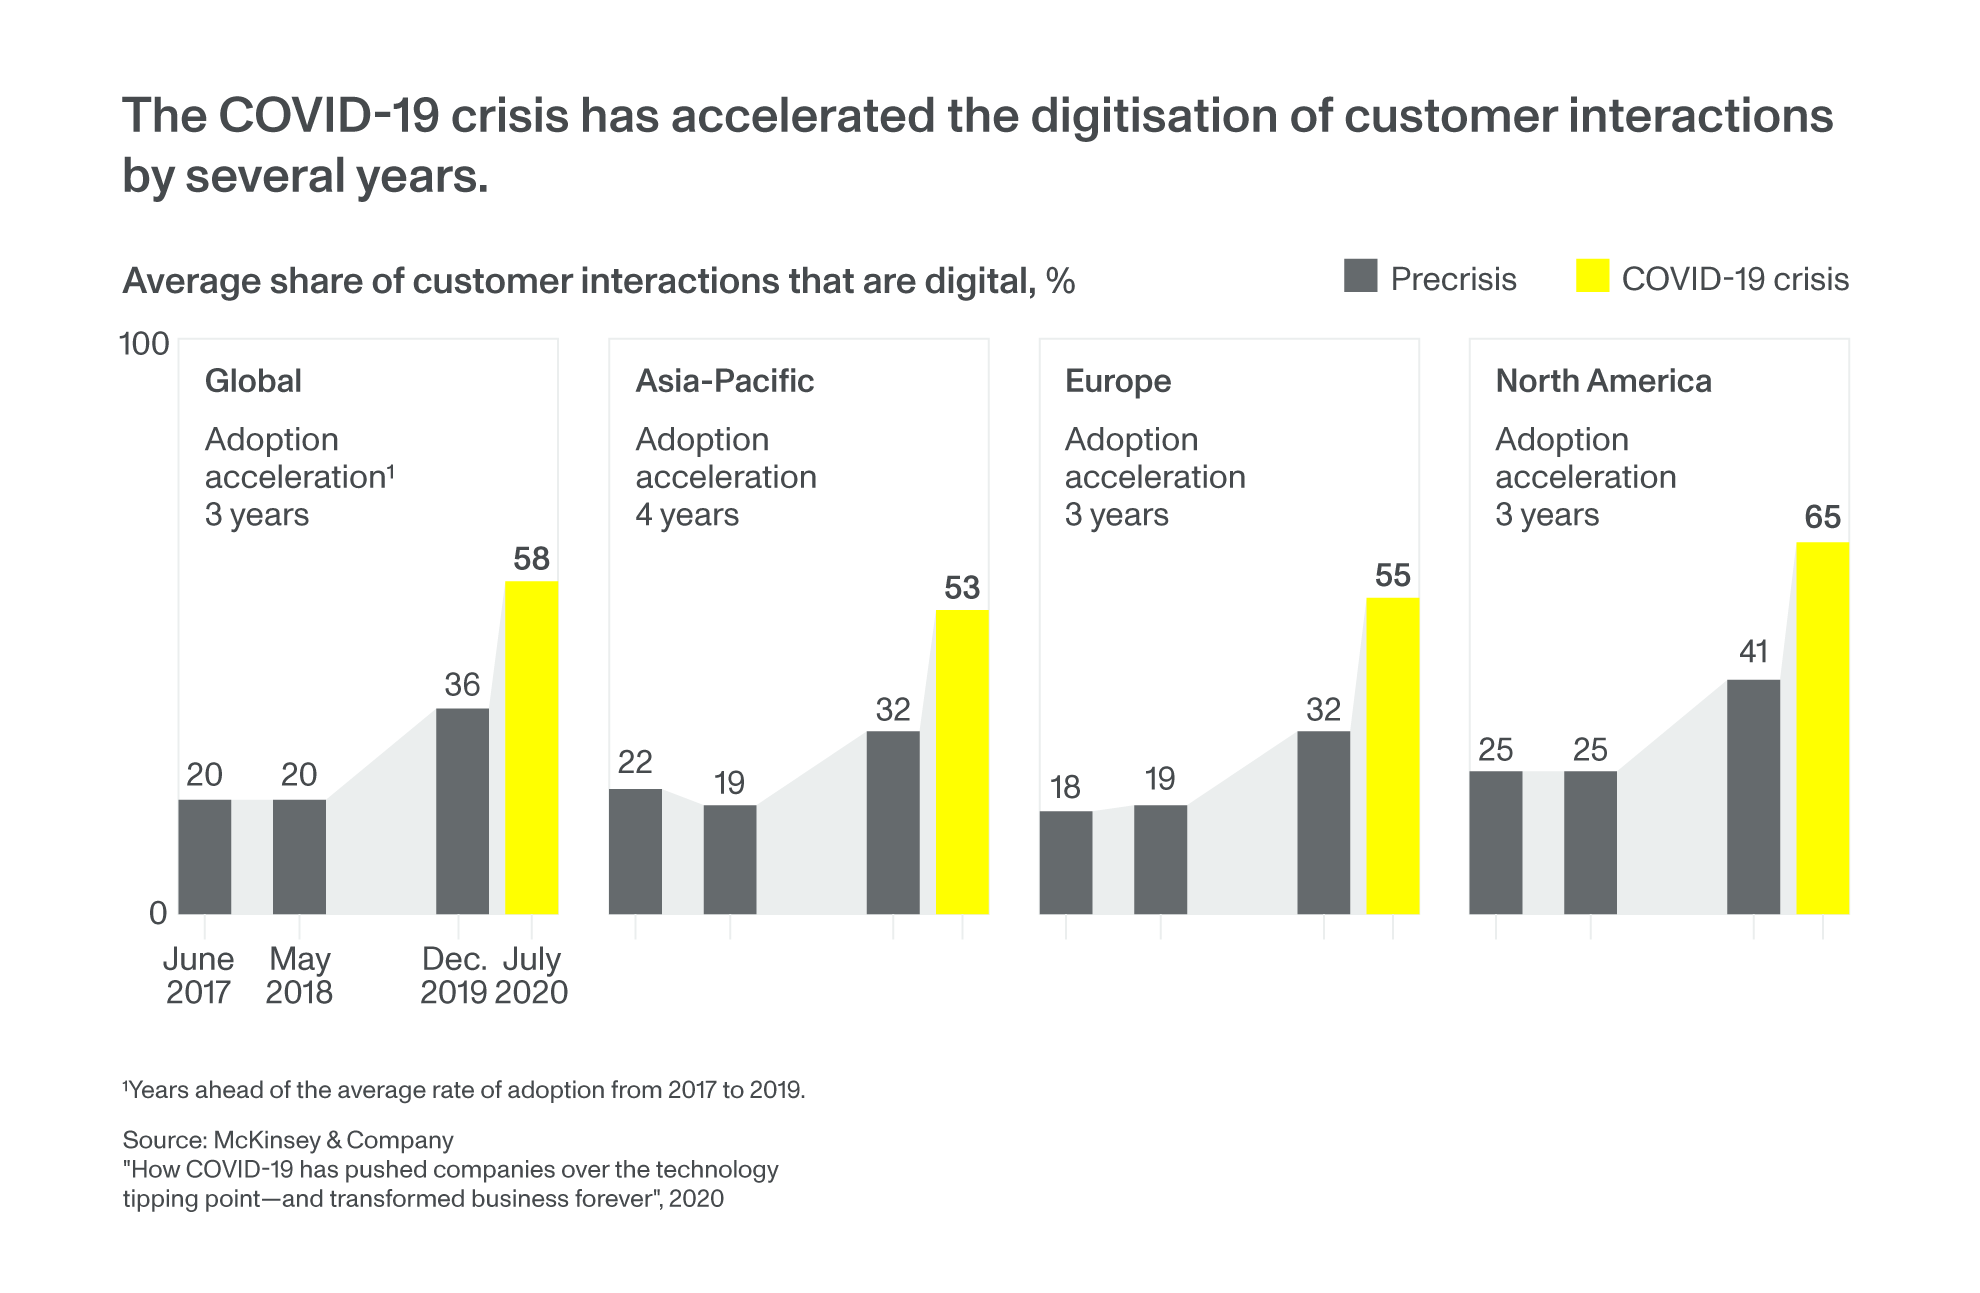 Covid-19 has accelerated the digitisation of customer interactions by several years